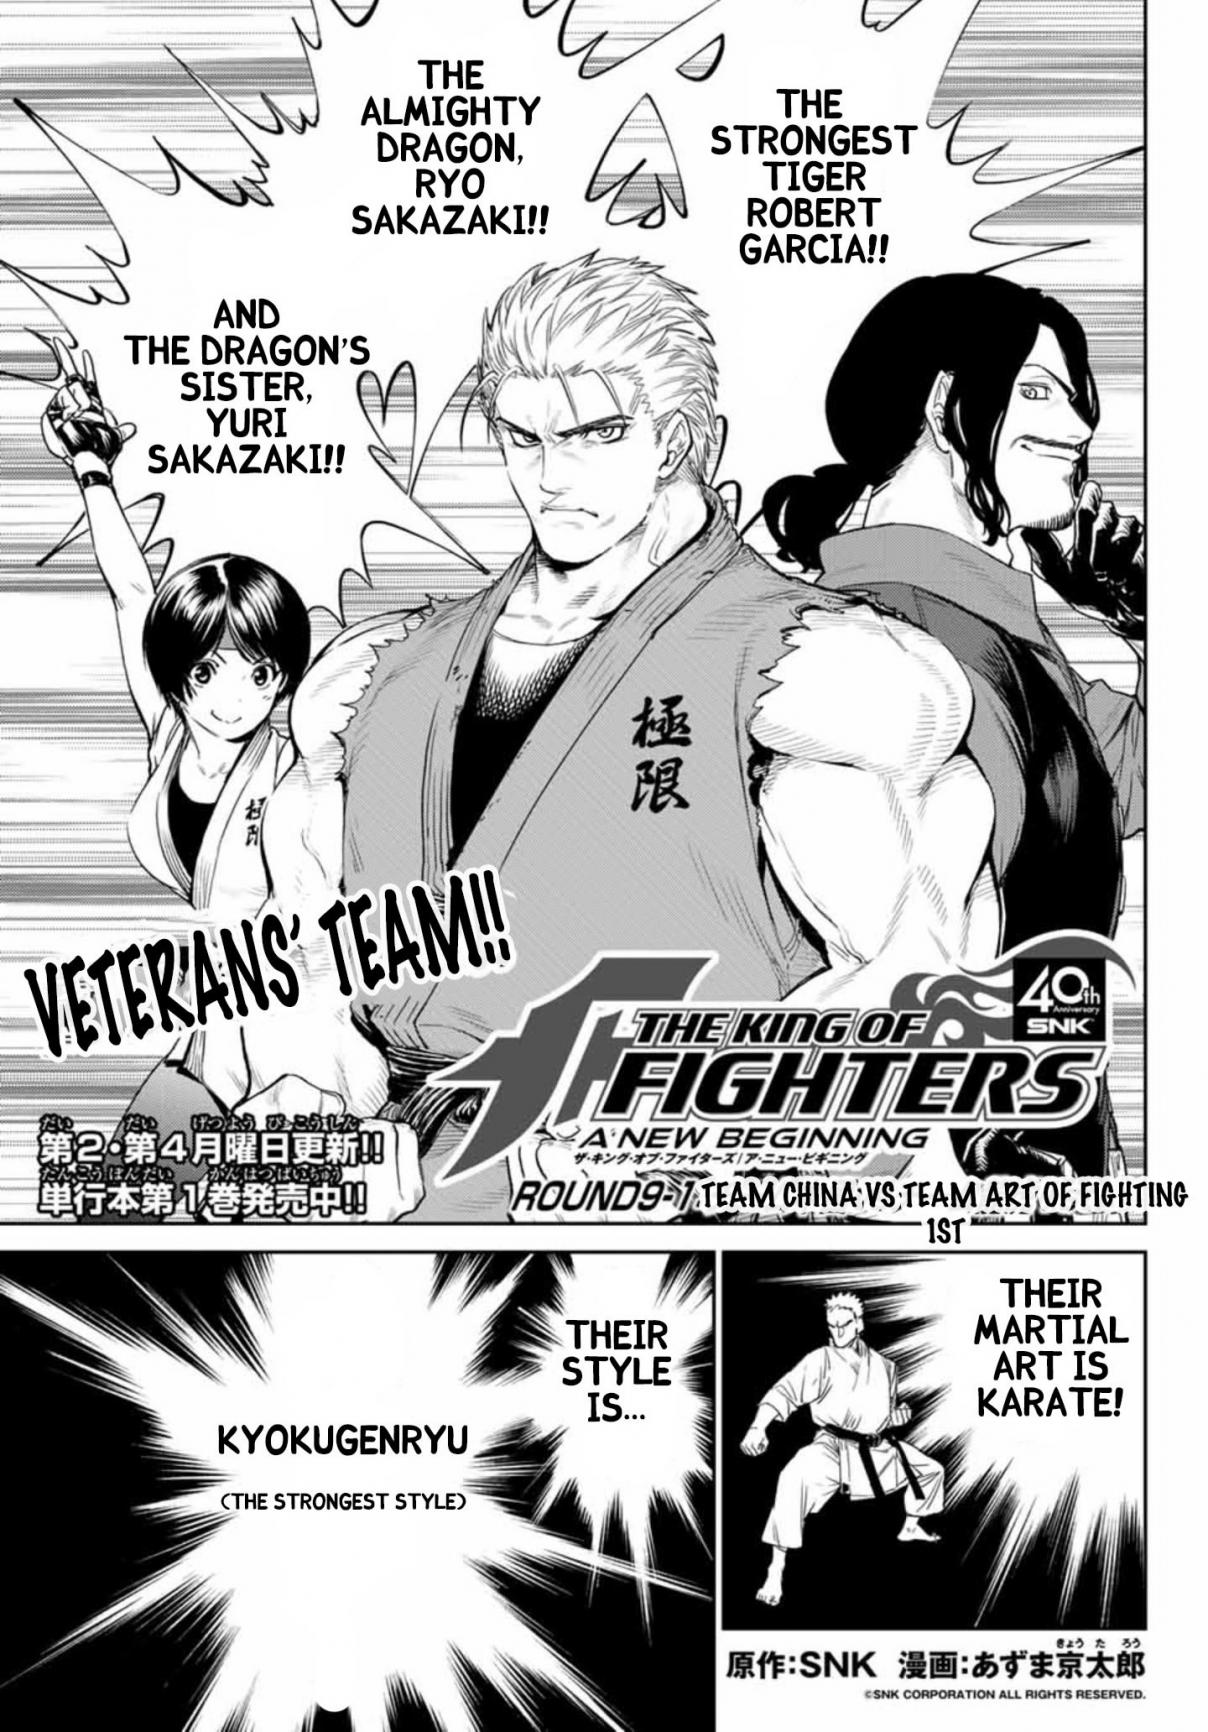 The King of Fighters: A New Beginning Vol. 2 Ch. 9.1 Team China vs Team Art of Fighting 1st